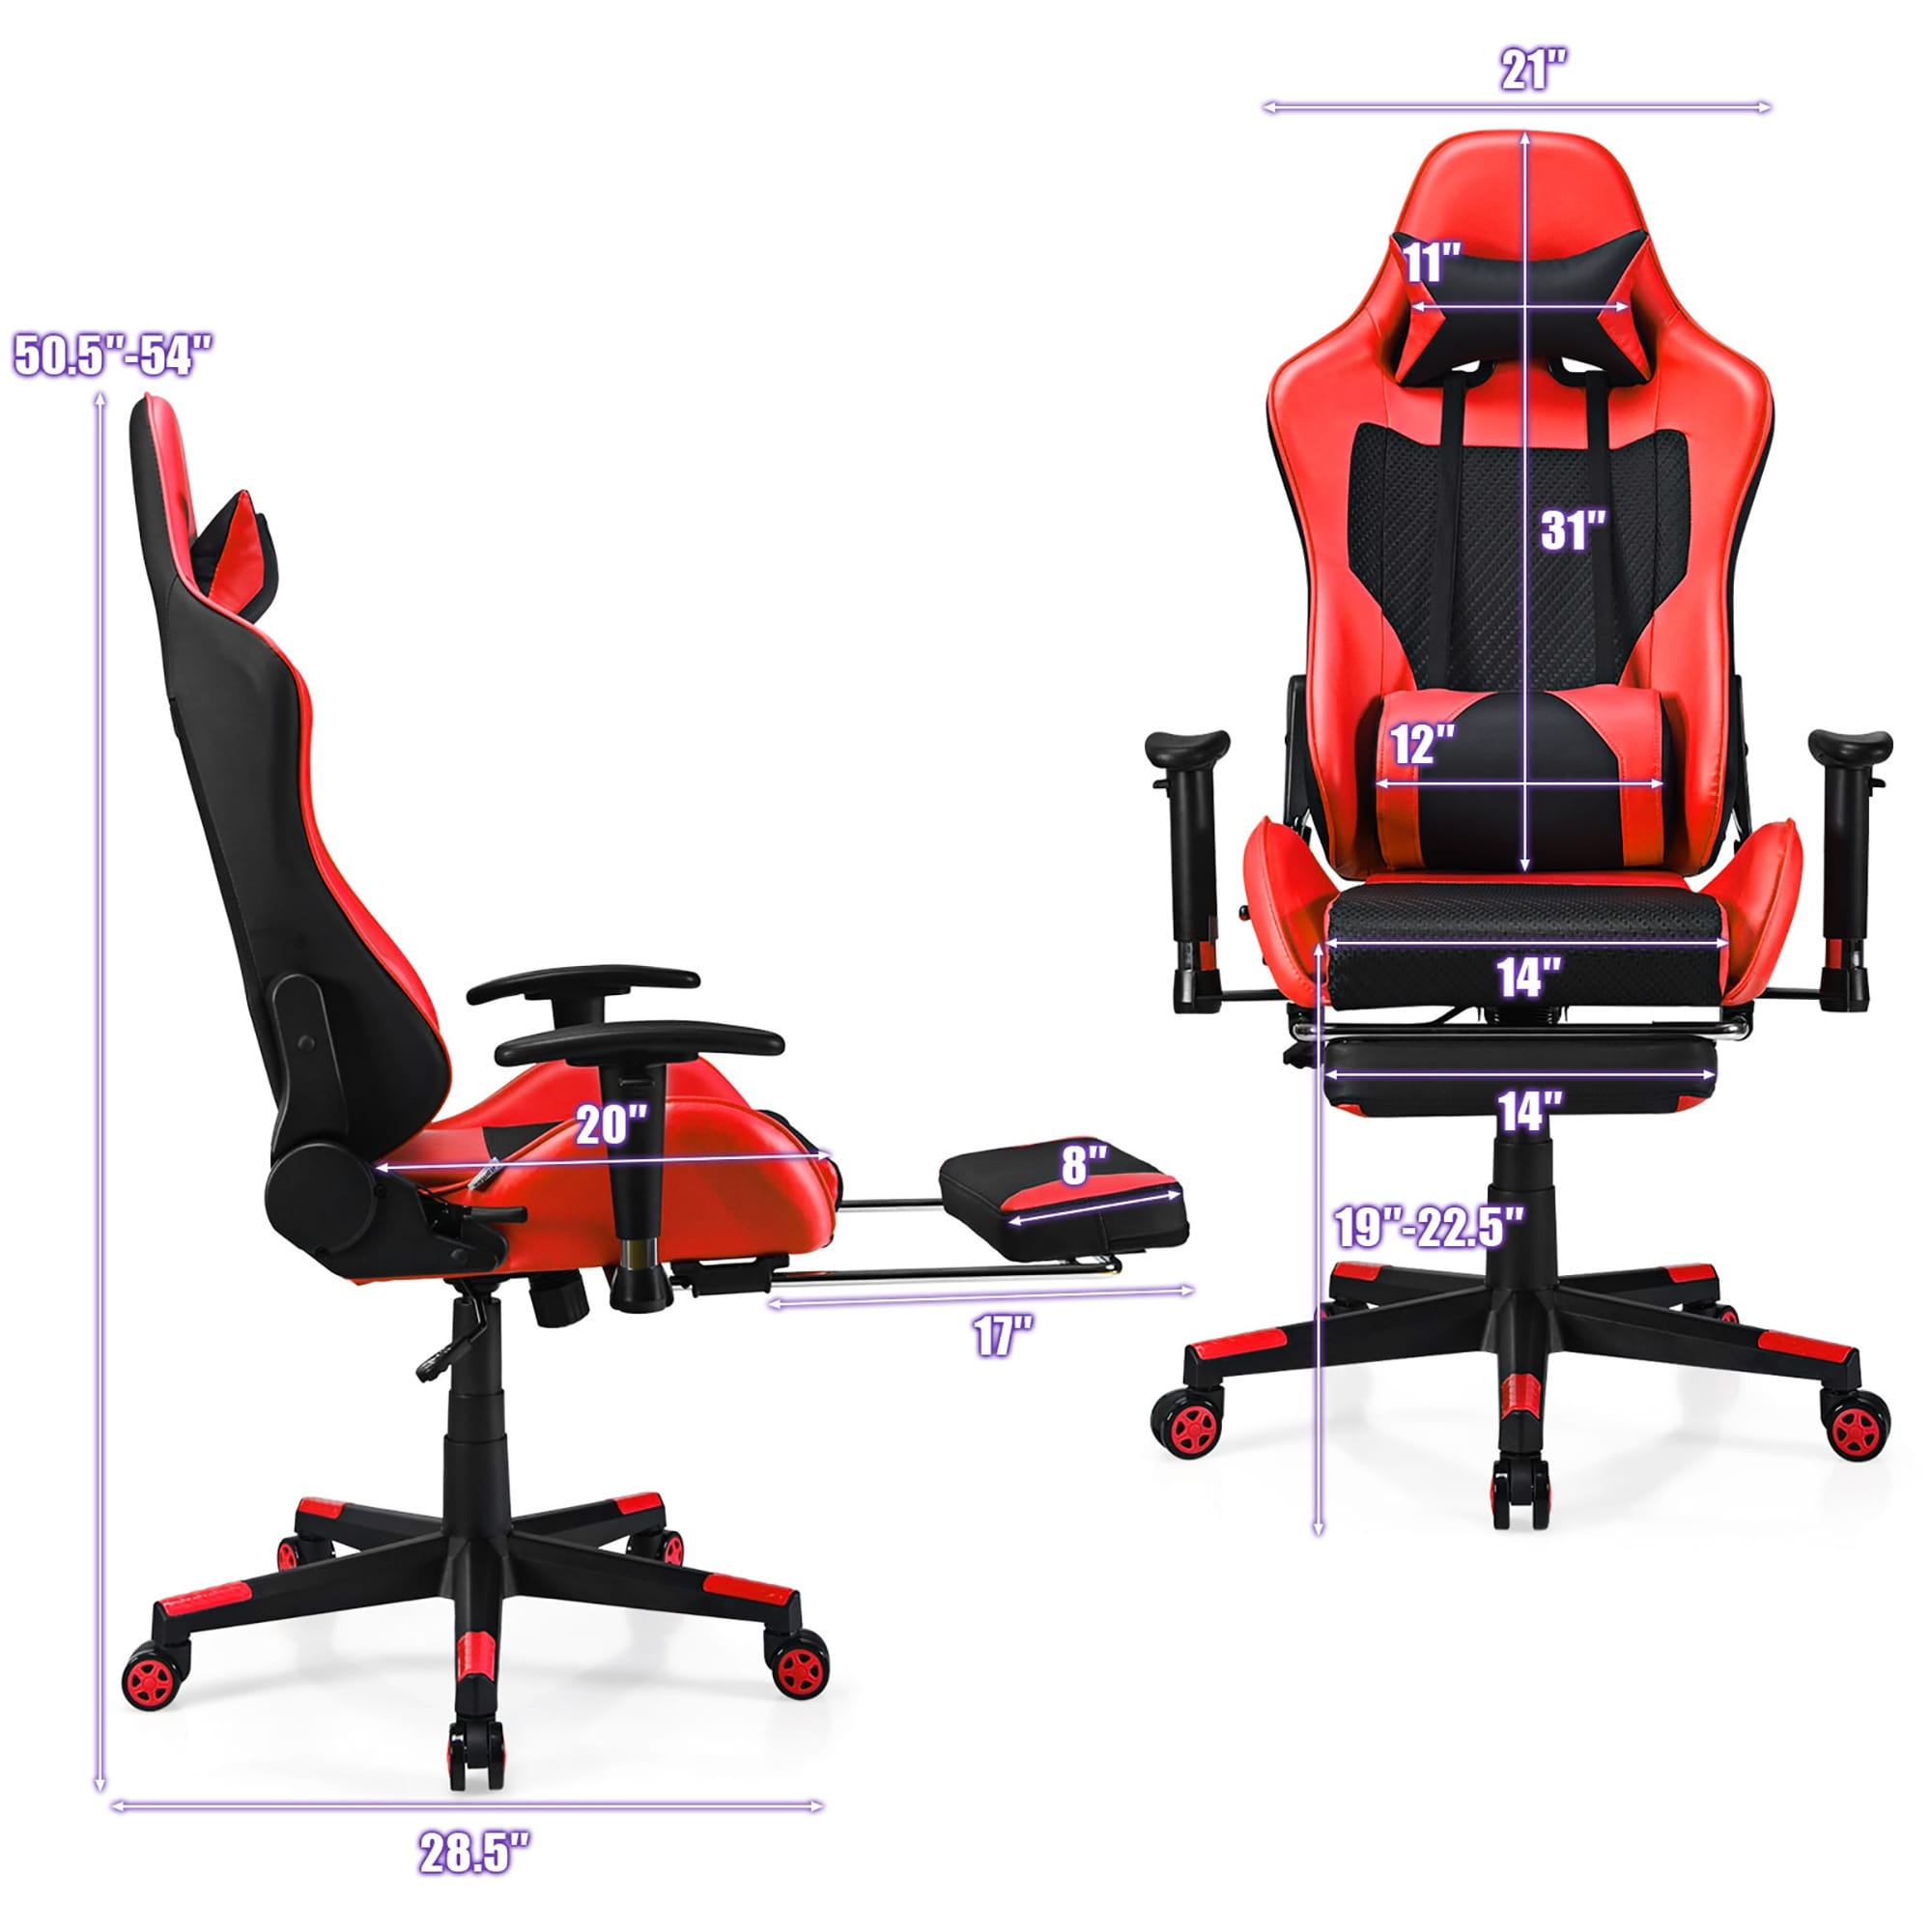 https://ak1.ostkcdn.com/images/products/is/images/direct/48777469ce6518e46b1e70f77bc2a98f158ee8b2/Gaming-Chair-Massage-Office-Chair-Computer-Gaming-Racing-Chair.jpg